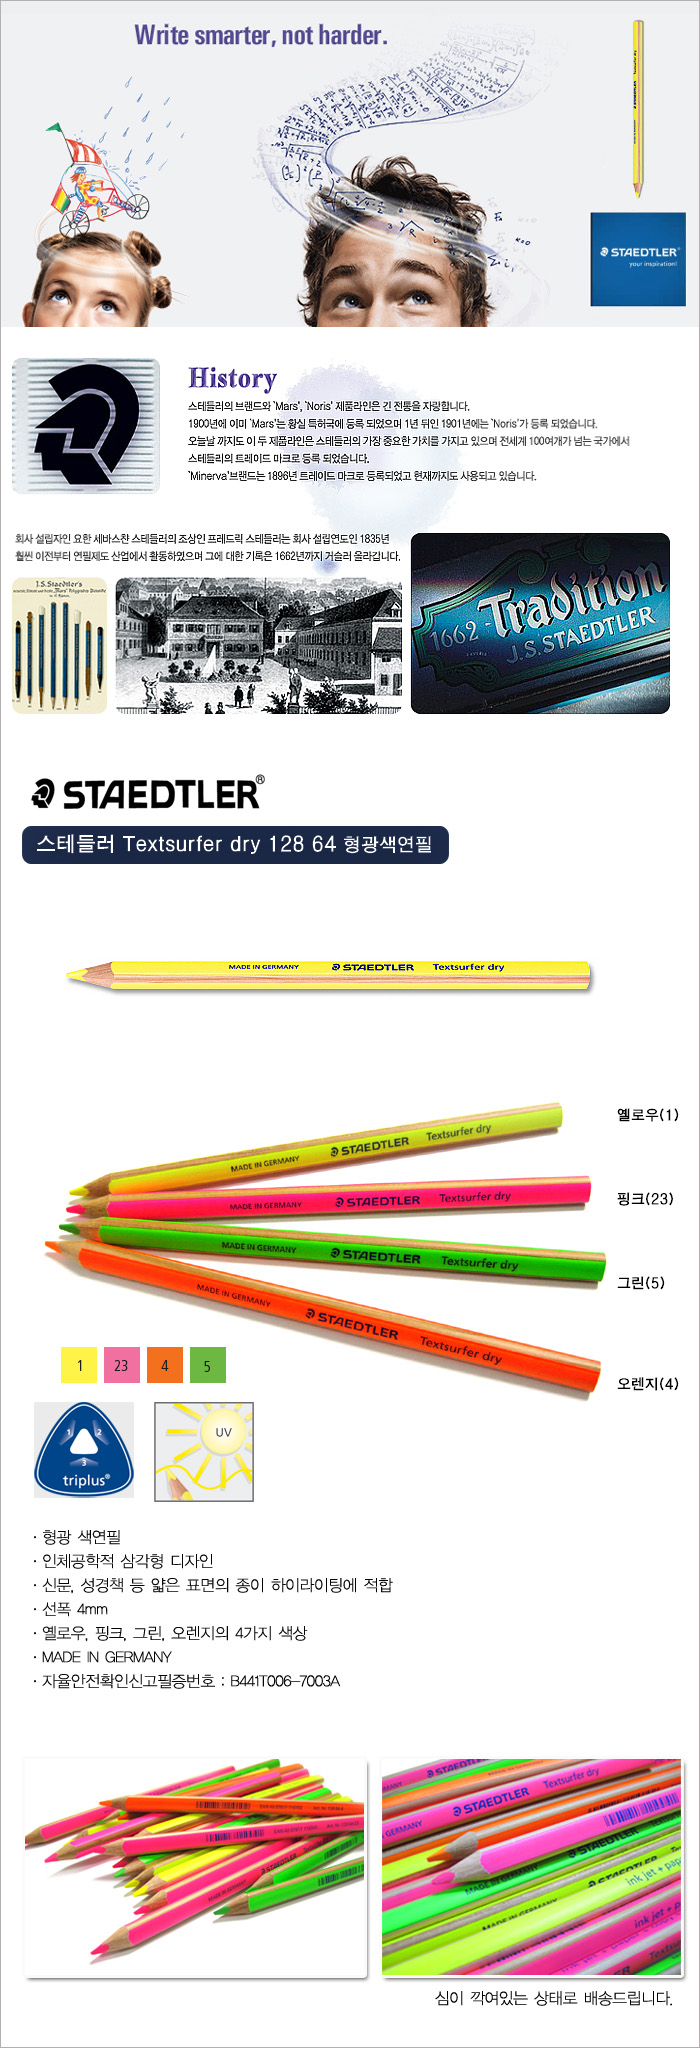 Original/ Staedtler Highlighter Pencils 1 pencil /128 64 Textsurfer dry/4 Colors/Note/Point Highlighter Pen/Imported from Germany